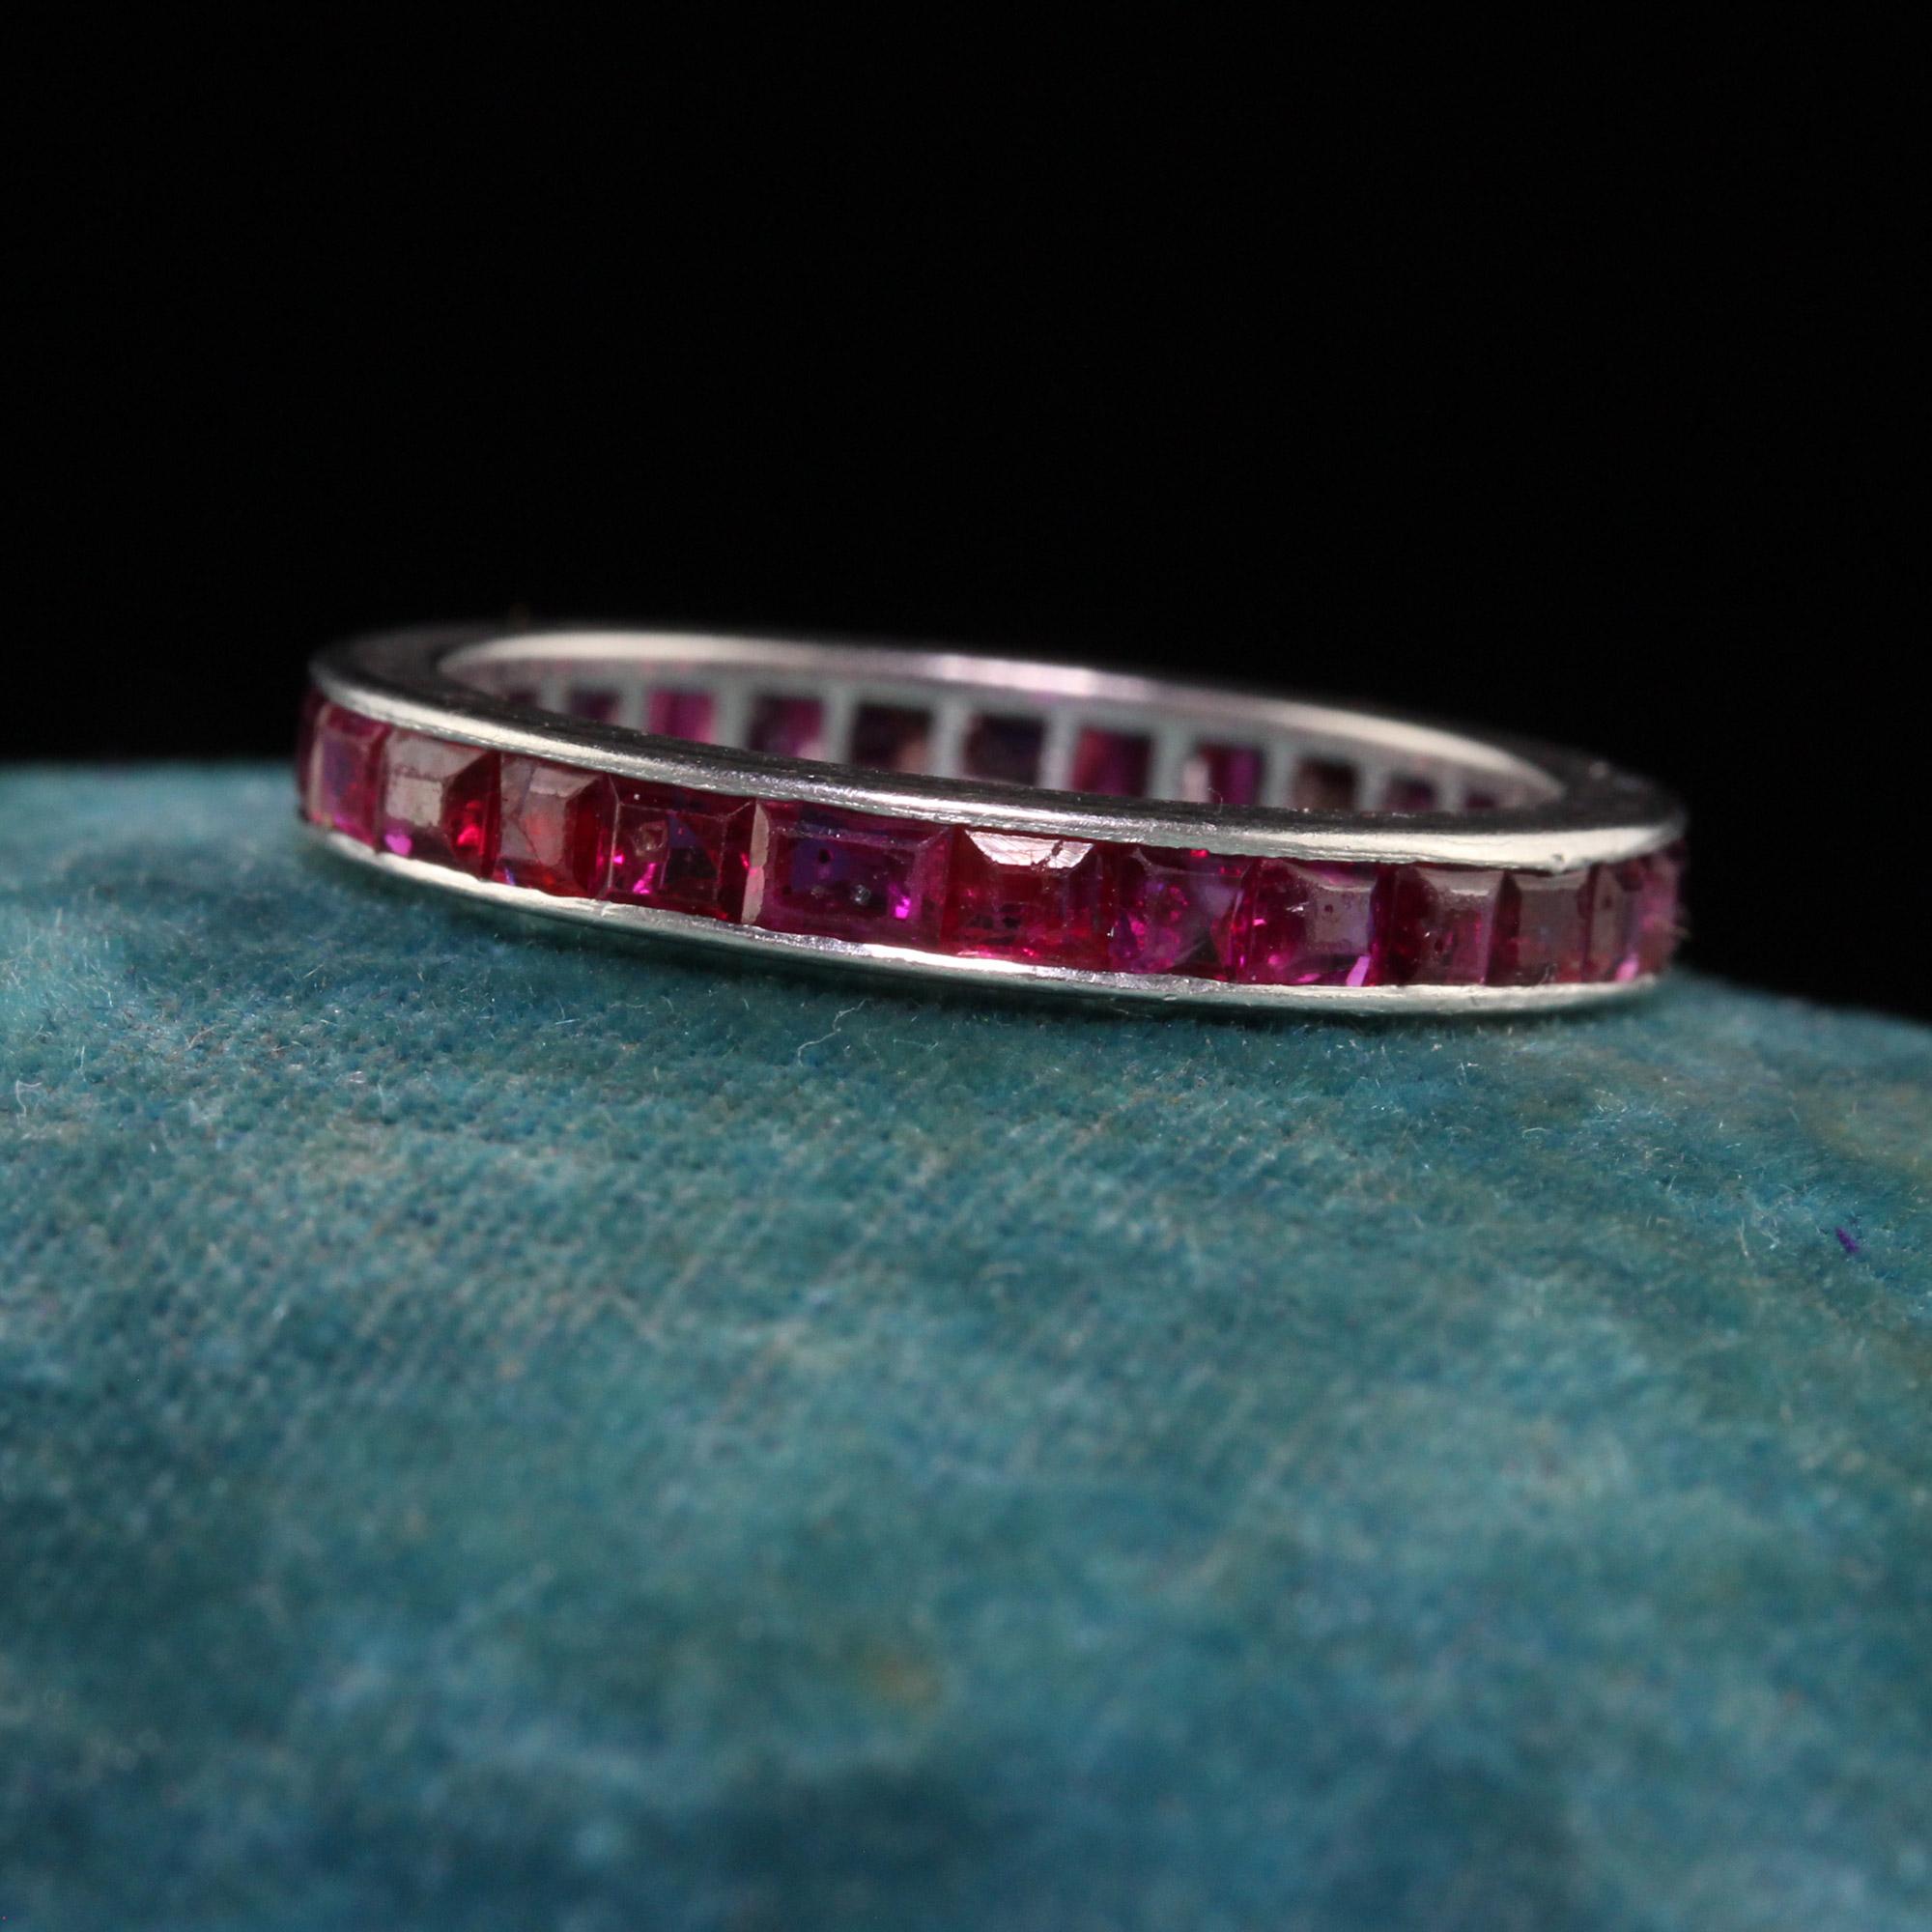 Beautiful Antique Art Deco Platinum Square Cut Ruby Eternity Band - Size 5 1/2. This beautiful band is crafted in platinum. There are square cut rubies going around the entire ring and the sides of the ring are plain. The ring is in good condition